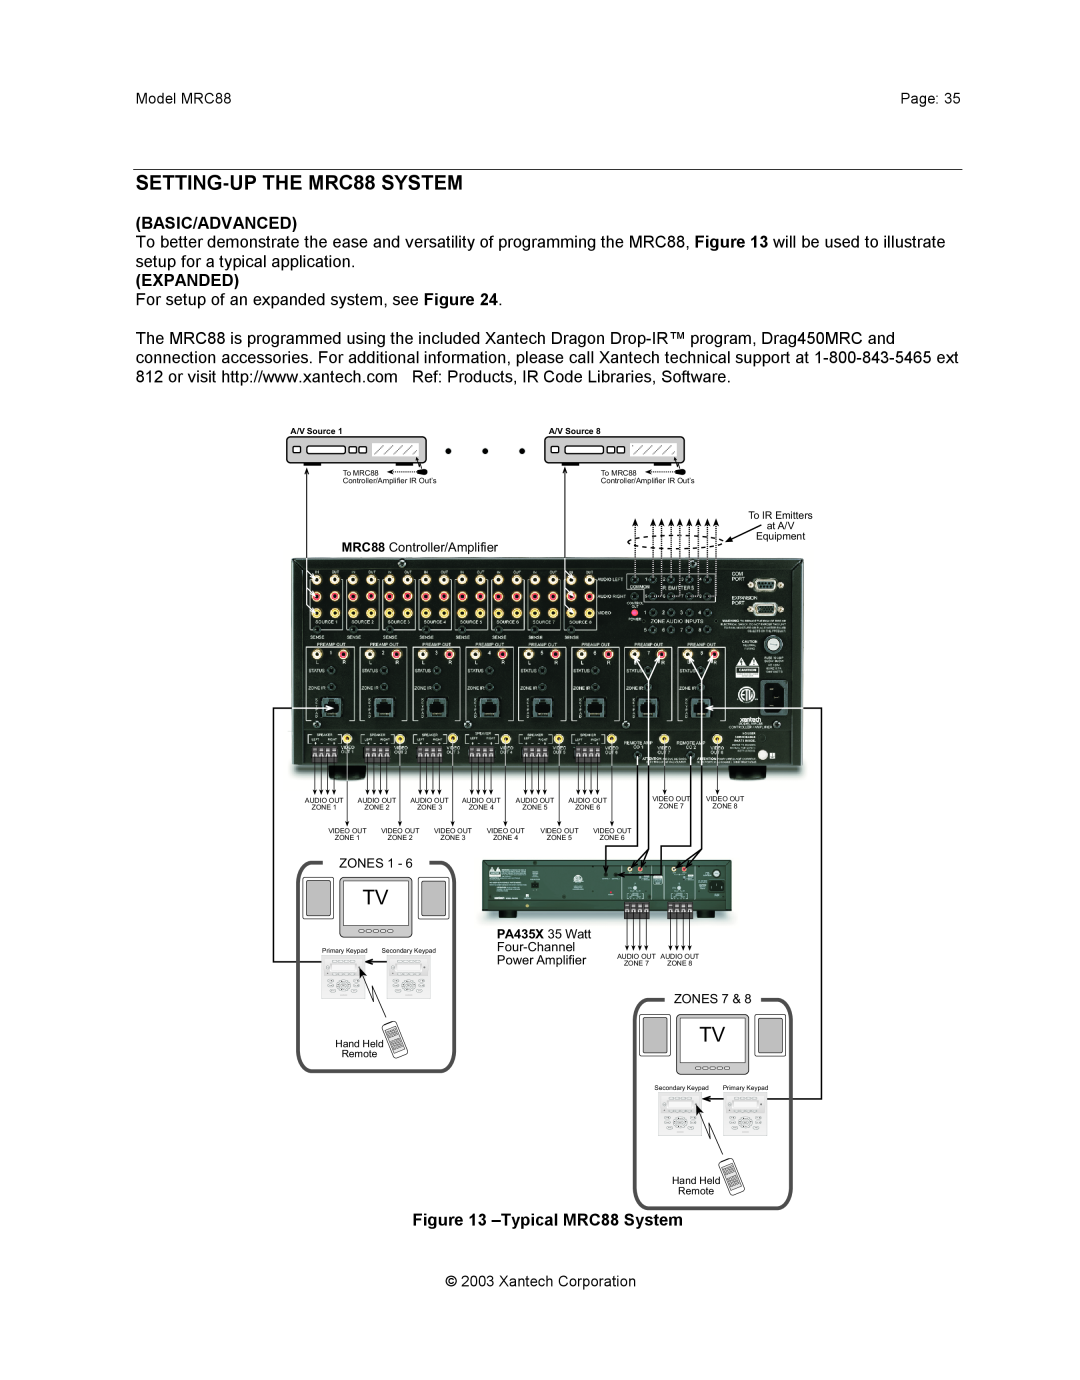 Xantech mrc88 installation instructions SETTING-UPTHE MRC88 SYSTEM, TypicalMRC88 System, Basic/Advanced, Expanded 